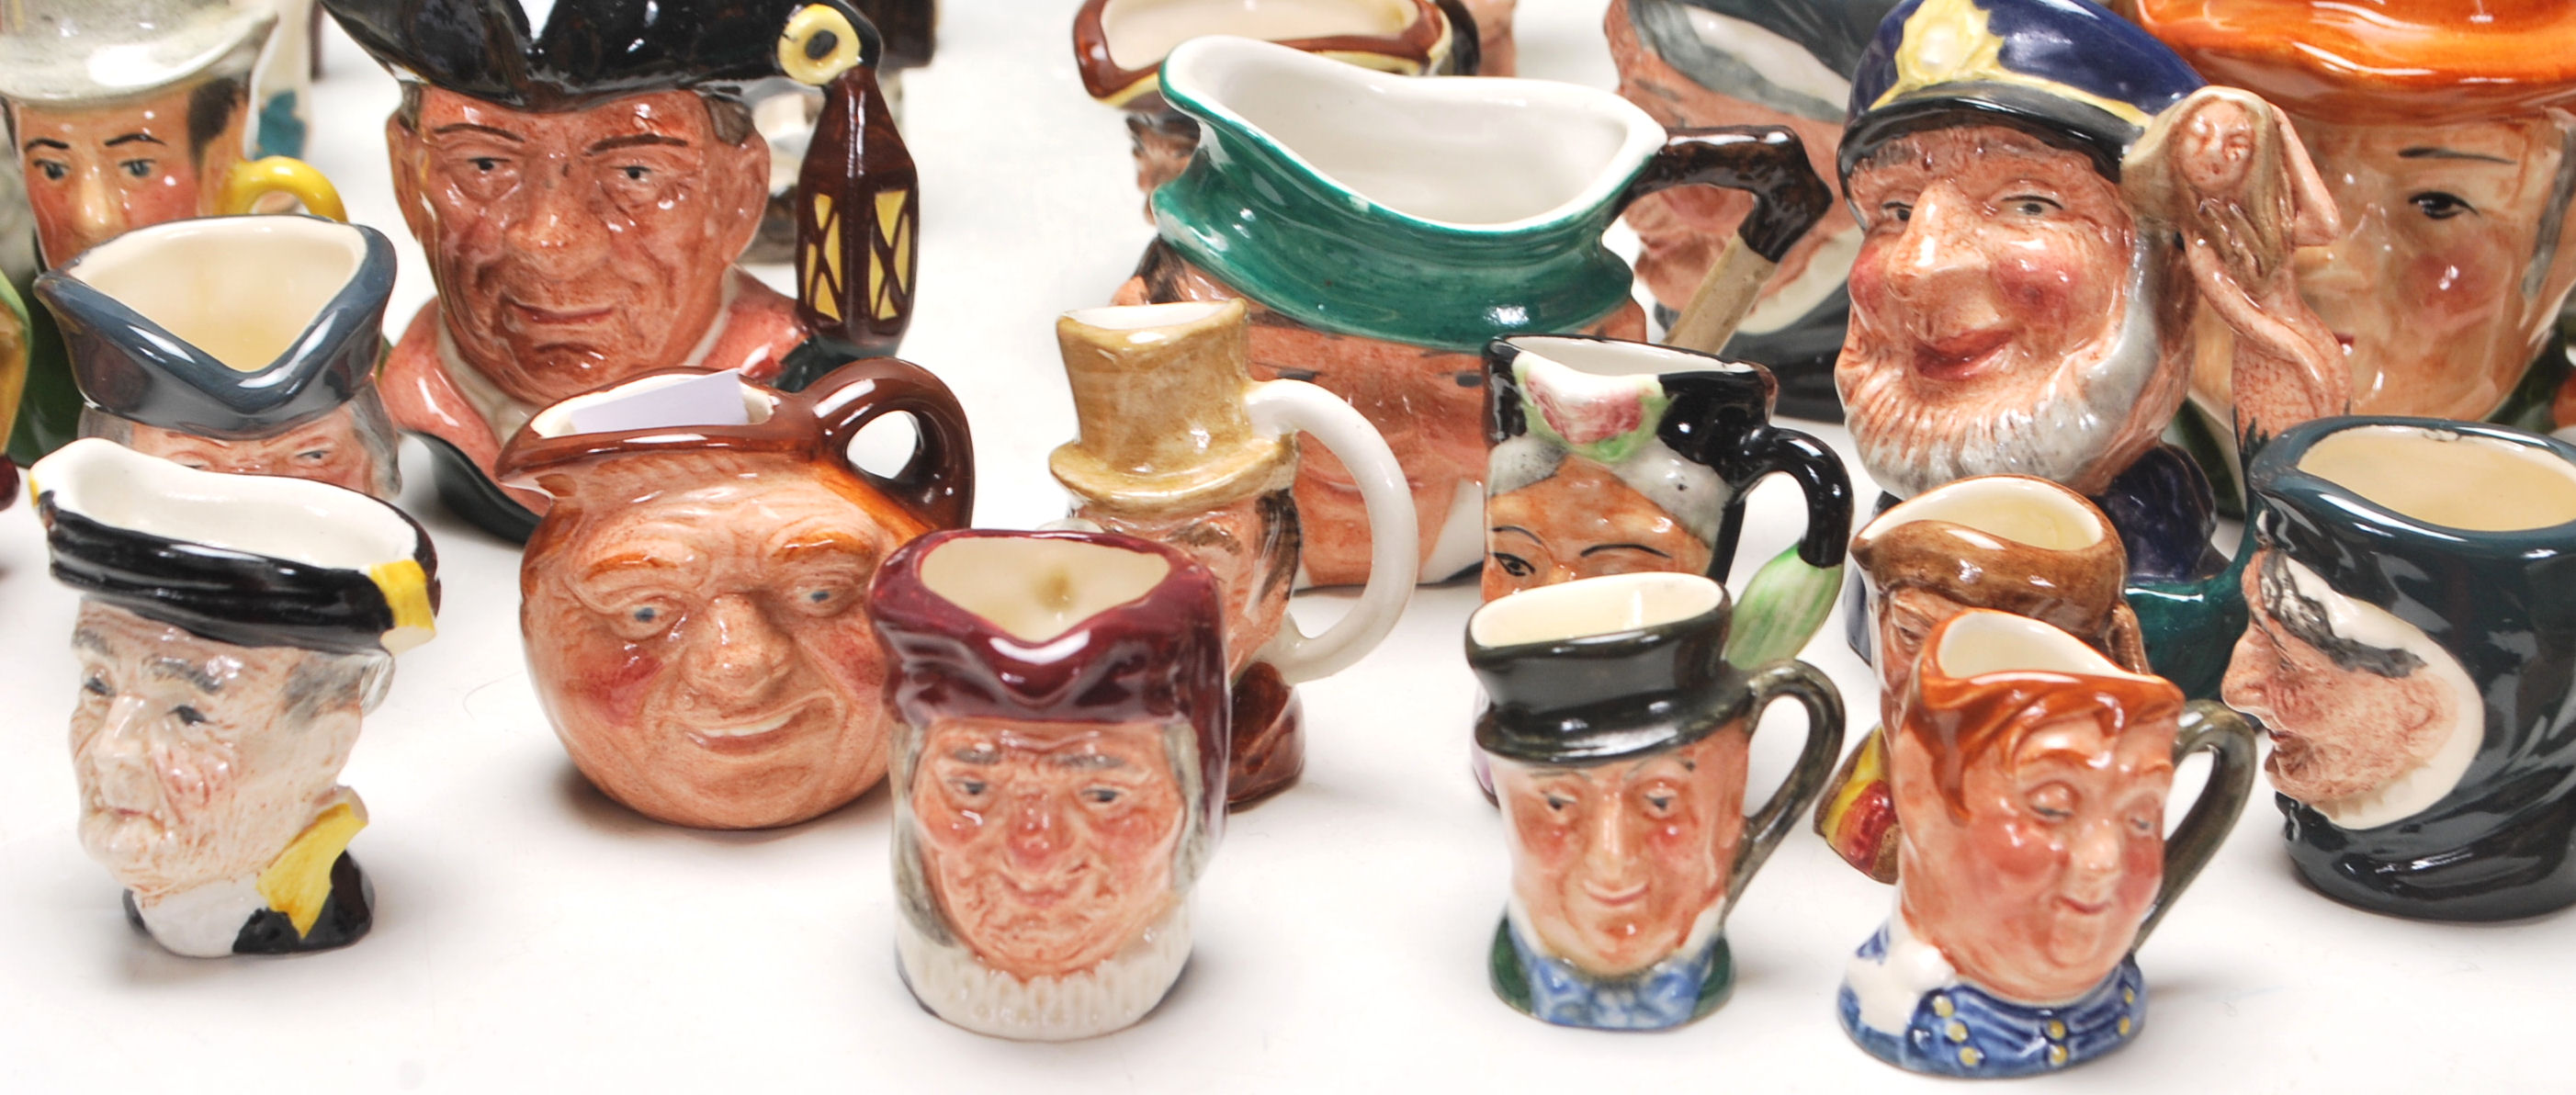 A LARGE COLLECTION OF ROYAL DOULTON MINATURE TOBY JUBS IN MANY CHARACTERS. - Image 2 of 12